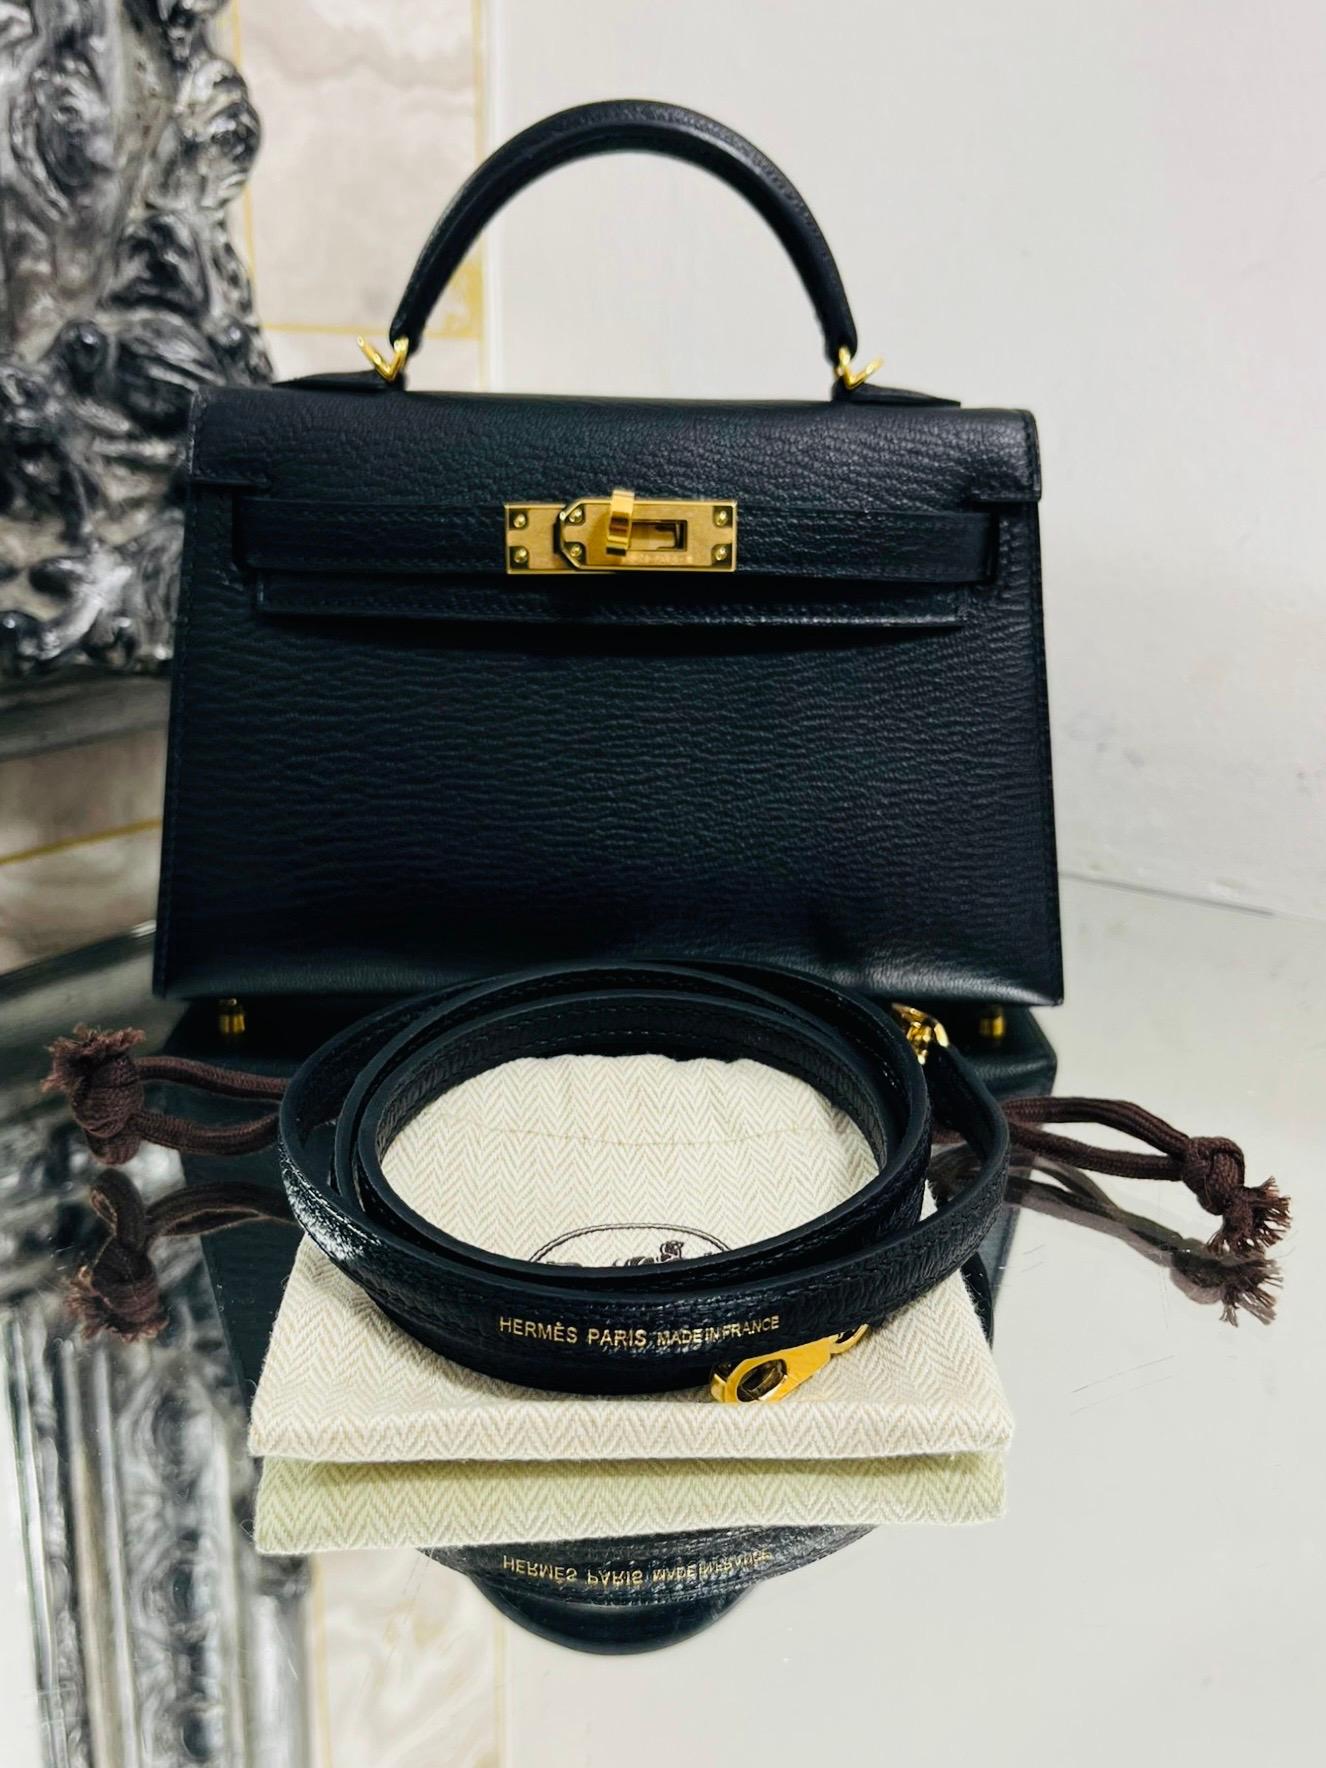 Hermes Mini Leather Mini Kelly Bag

Much sought after and bag of the moment, black Mysore Chevre leather and gold plated hardware. Top carry handle, detachable crossbody shoulder strap and twist lock closure.

2023 date stamp.

Size -  Mini - Height